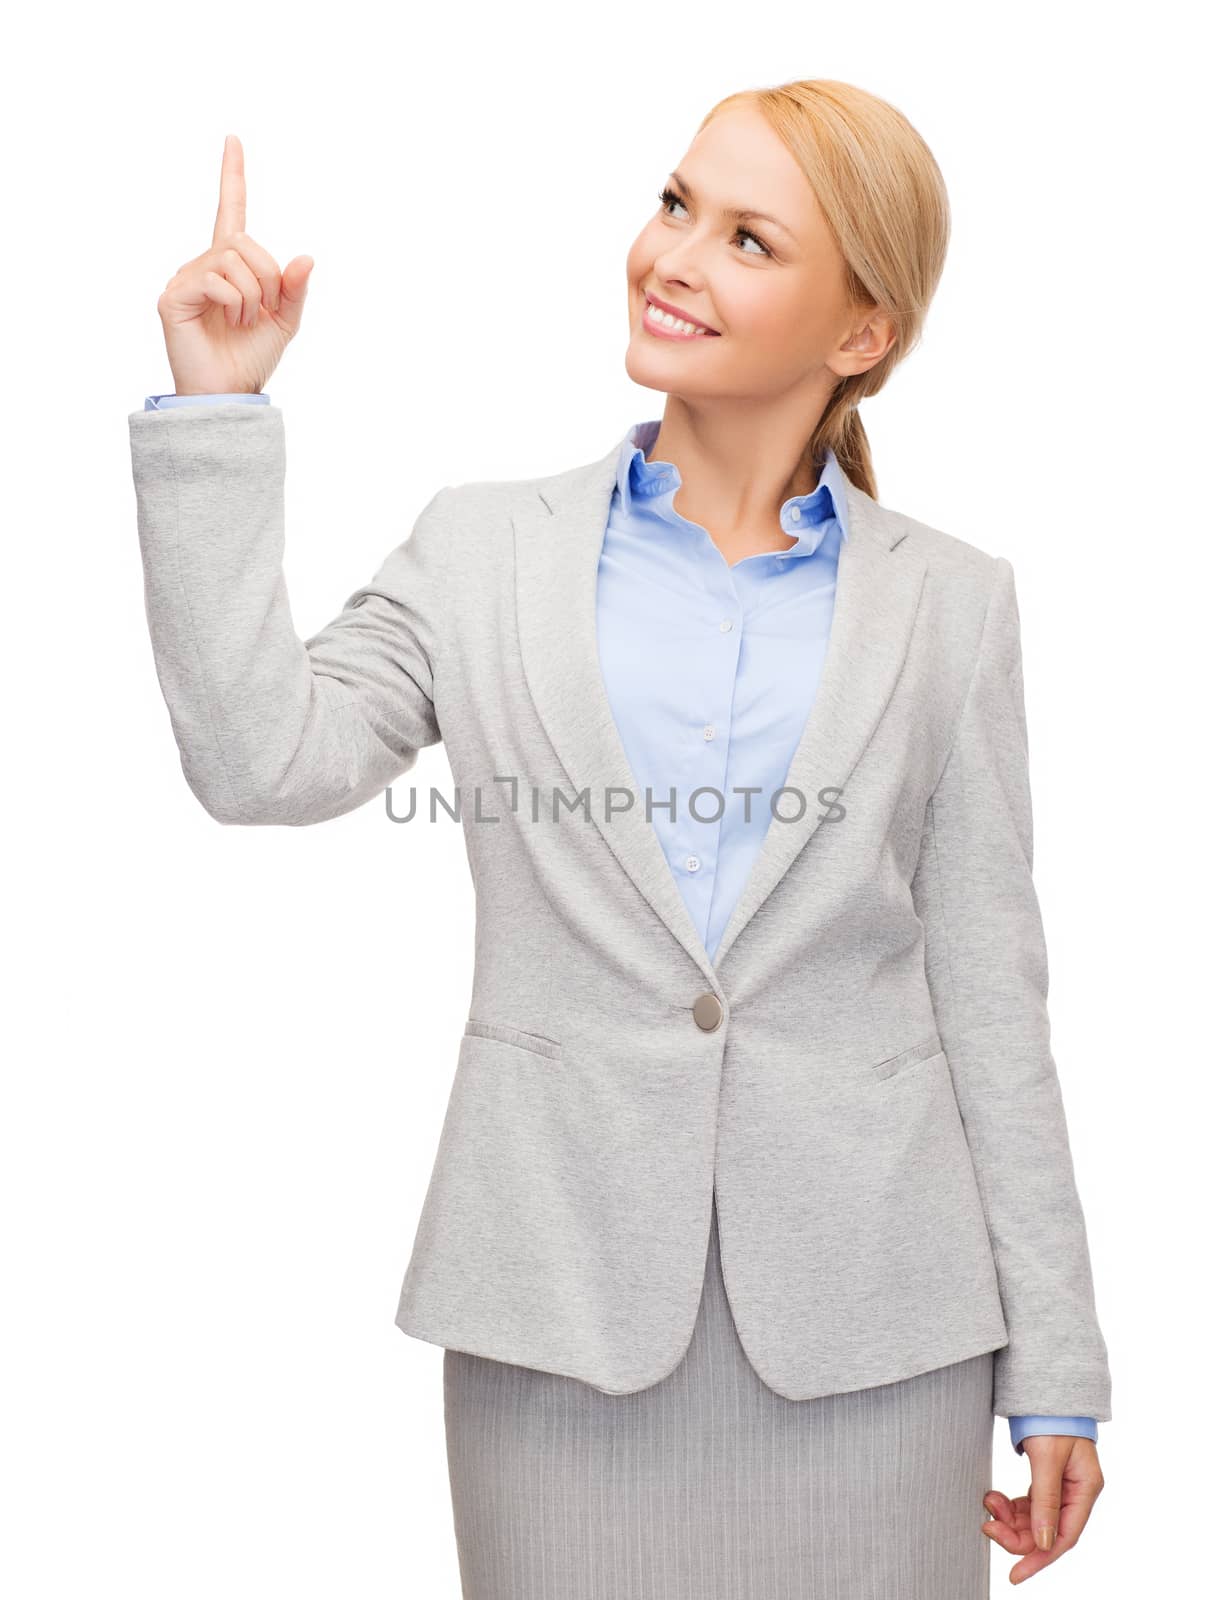 business and education concept - attractive young businesswoman with her finger up looking up